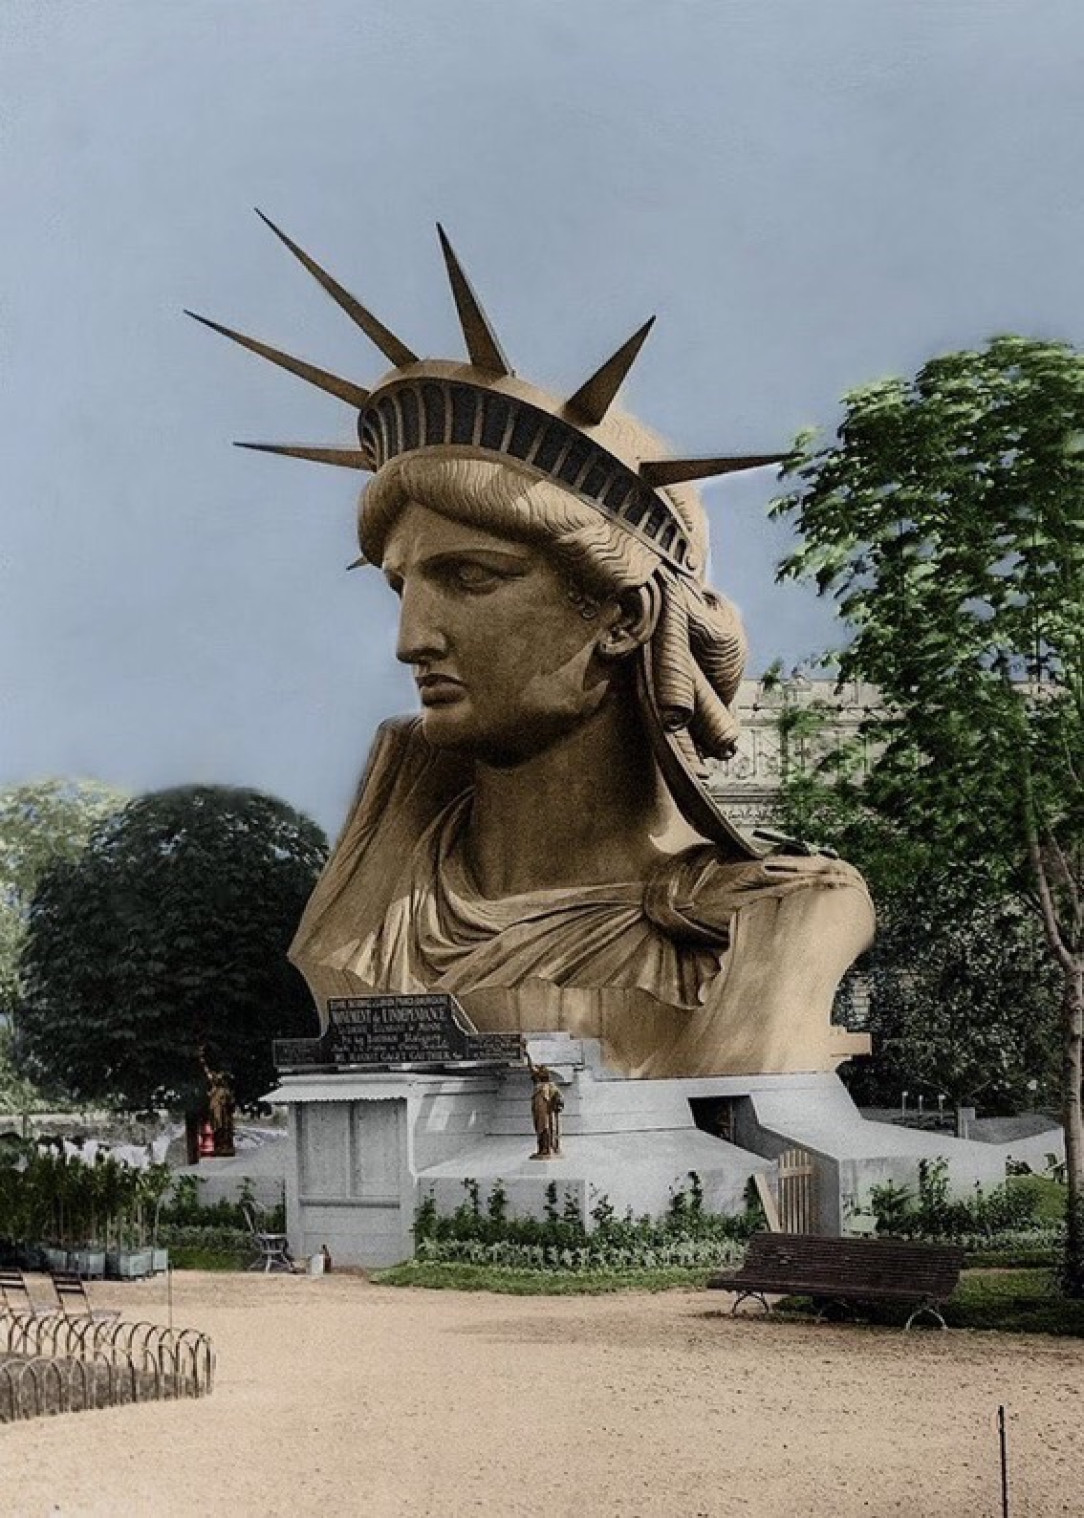 The head of Statue of Liberty, displayed in Paris (1878)